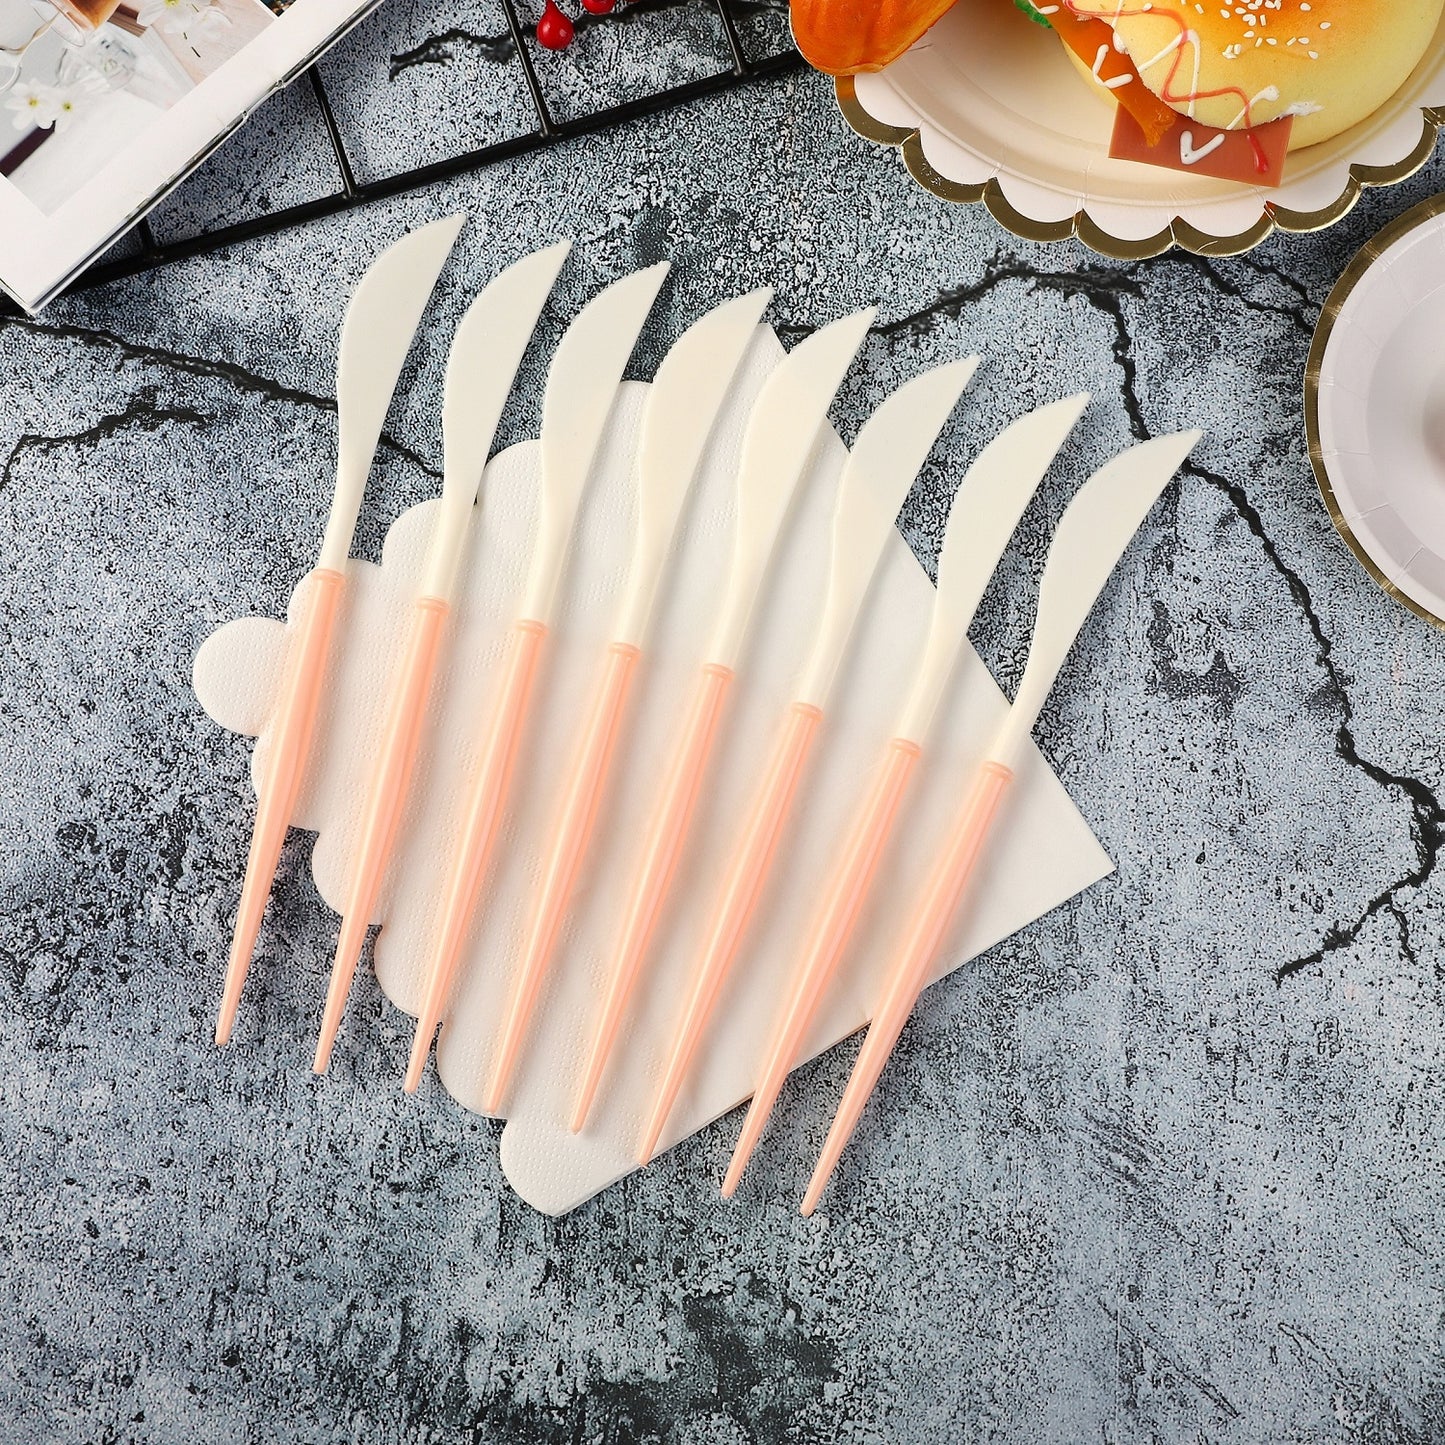 Orange Disposable Cutlery Plastic Knife Forks Spoons Tableware Party Supplies Decoration For Camping BBQ Wedding Outdoor Birthday